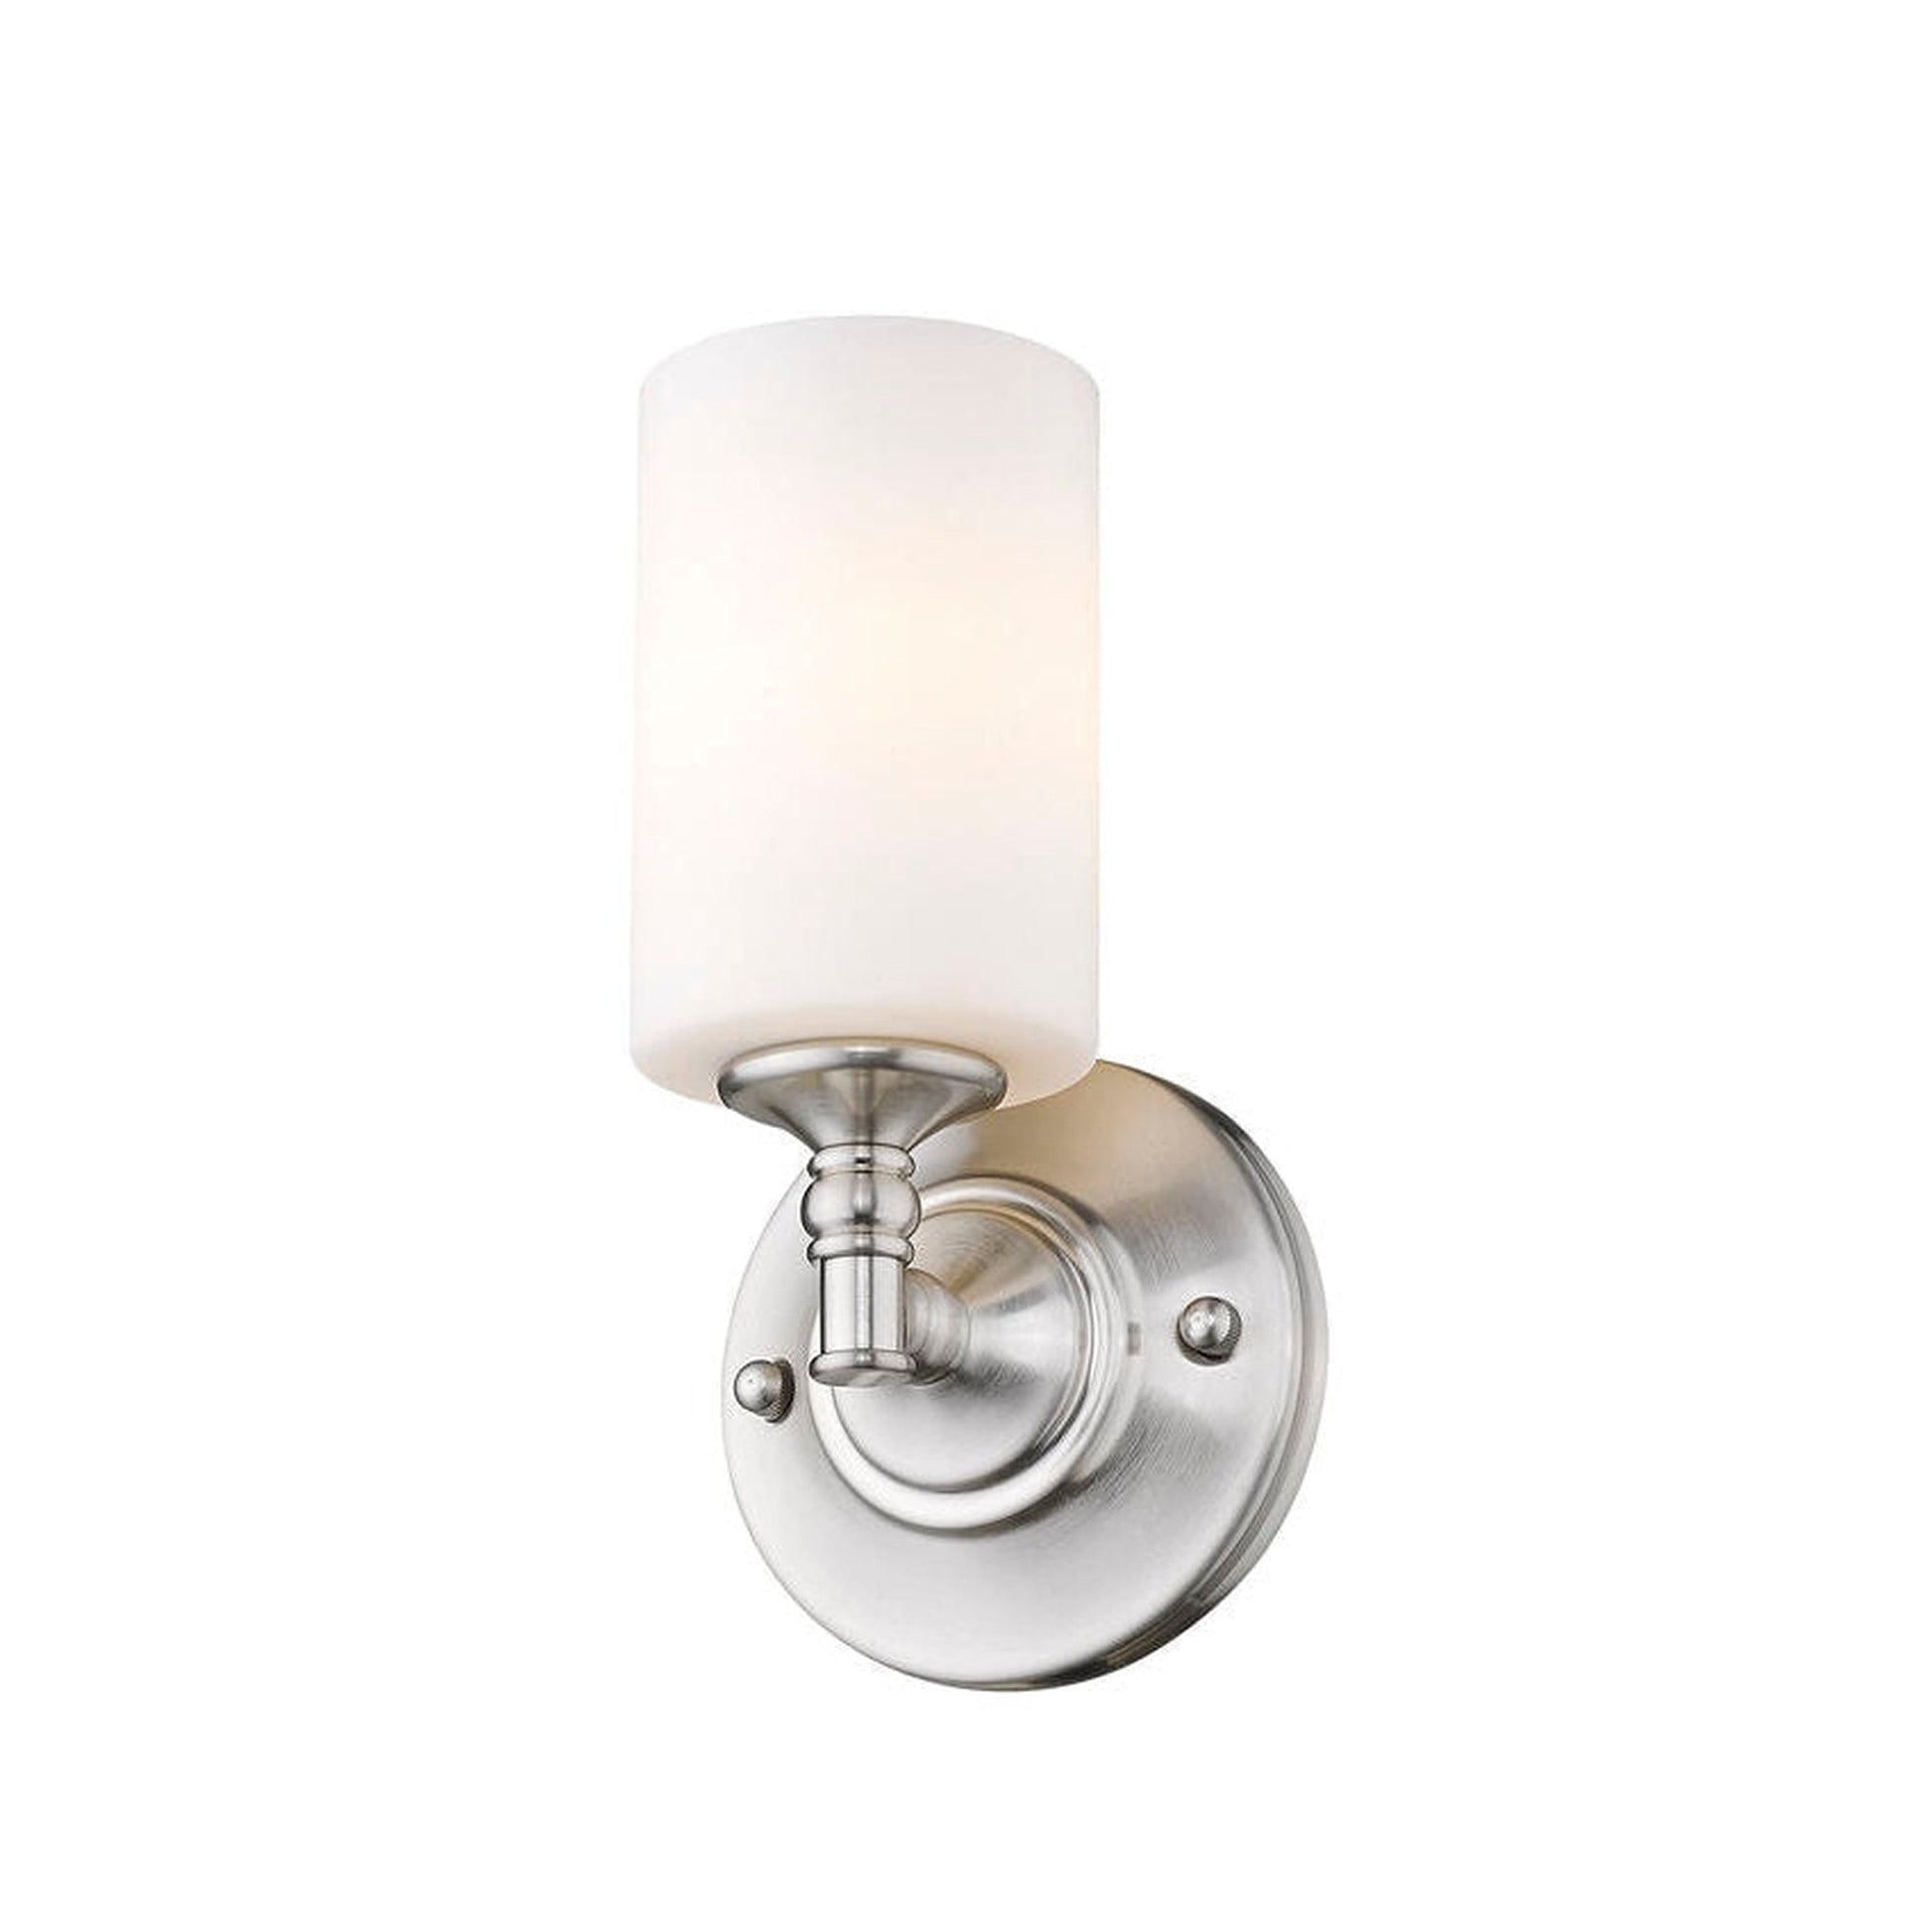 Z-Lite Cannondale 6" 1-Light Brushed Nickel Wall Sconce With Matte Opal Glass Shade